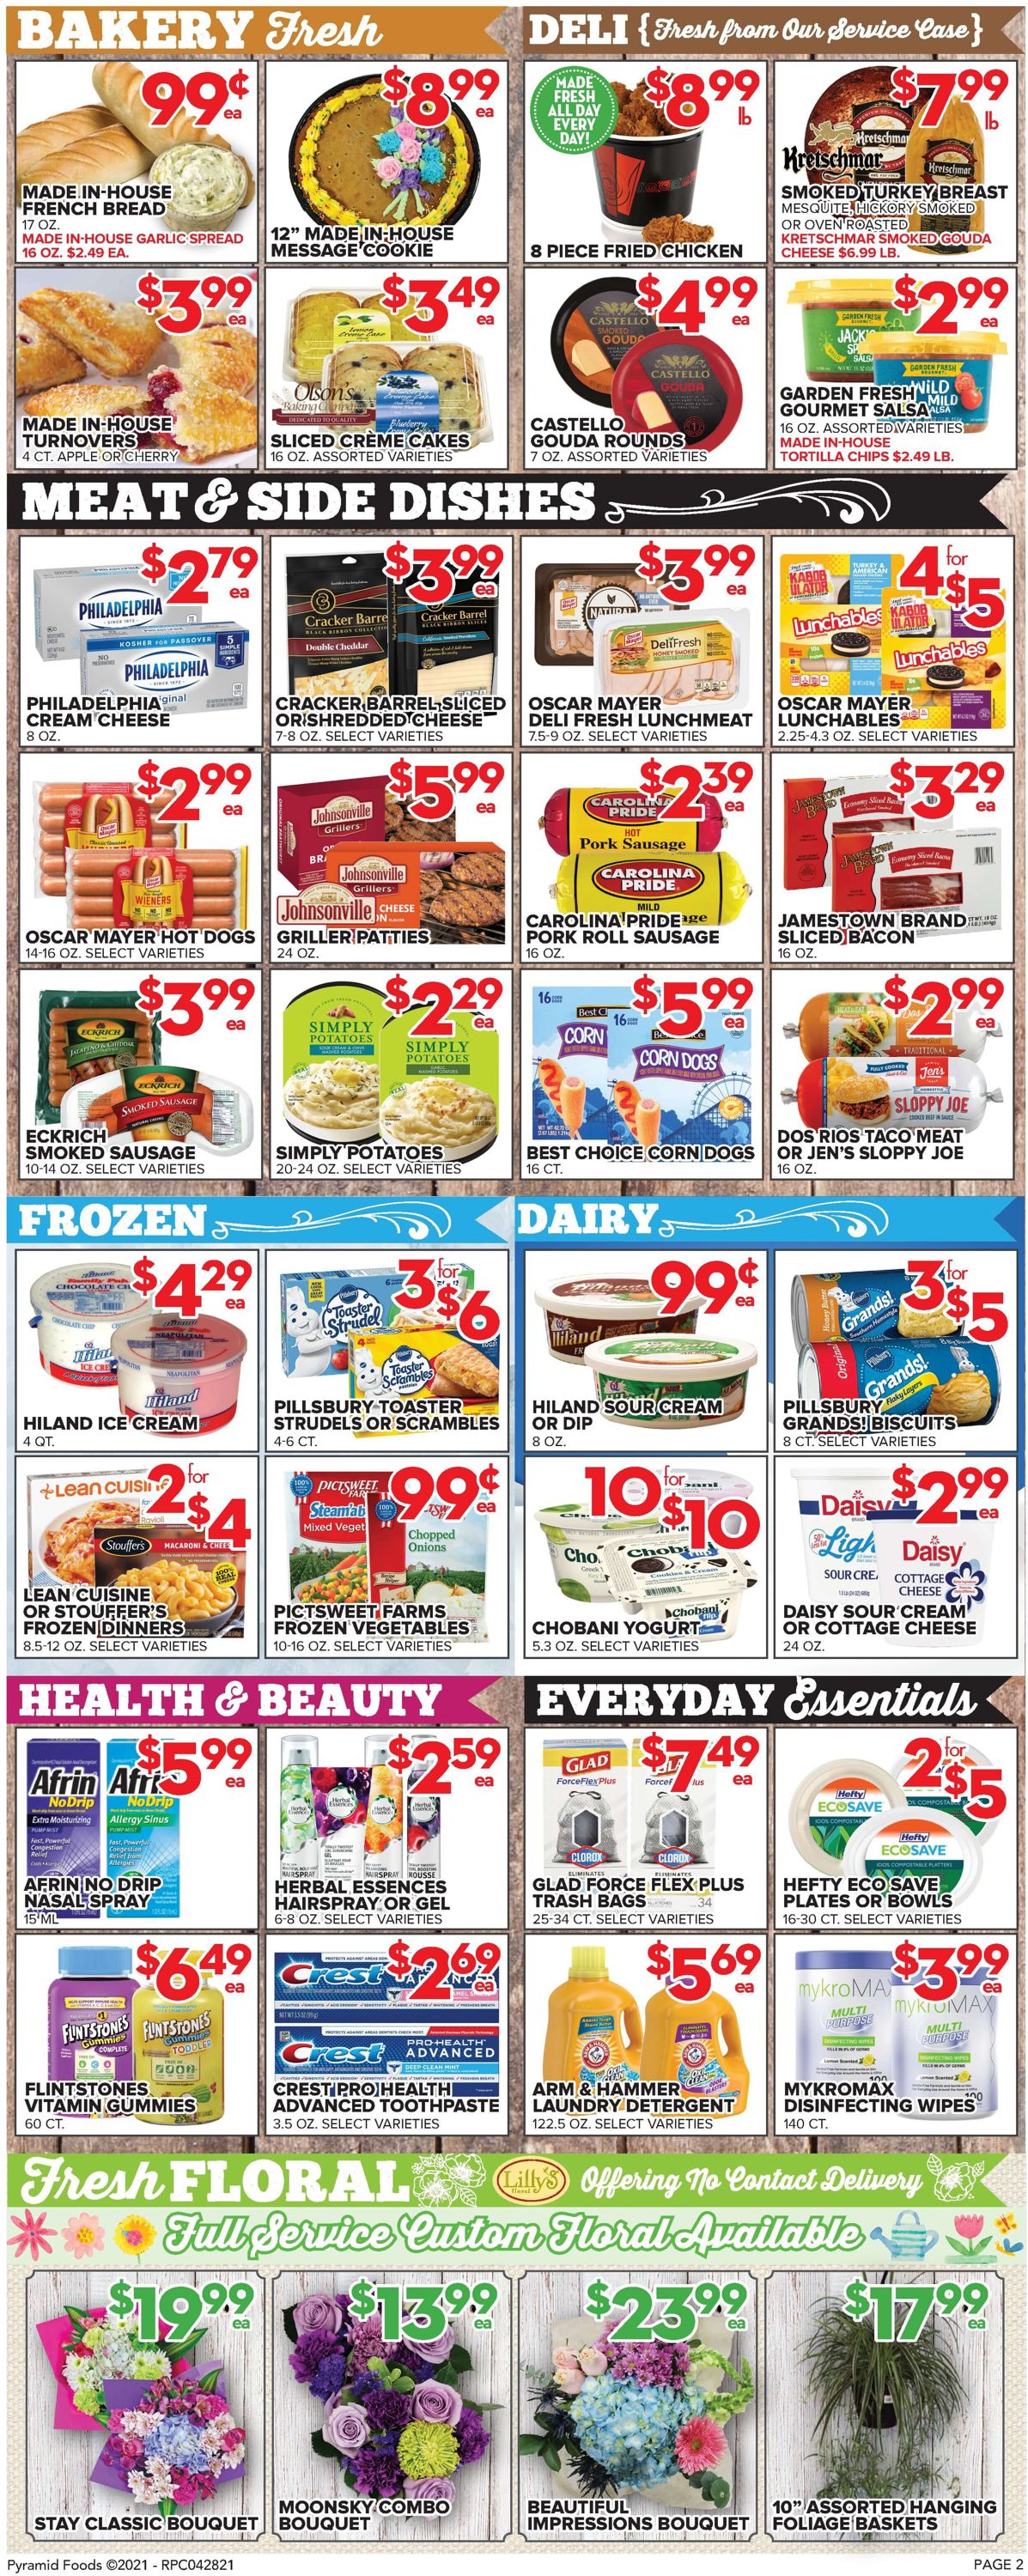 Price Cutter Ad from 04/28/2021